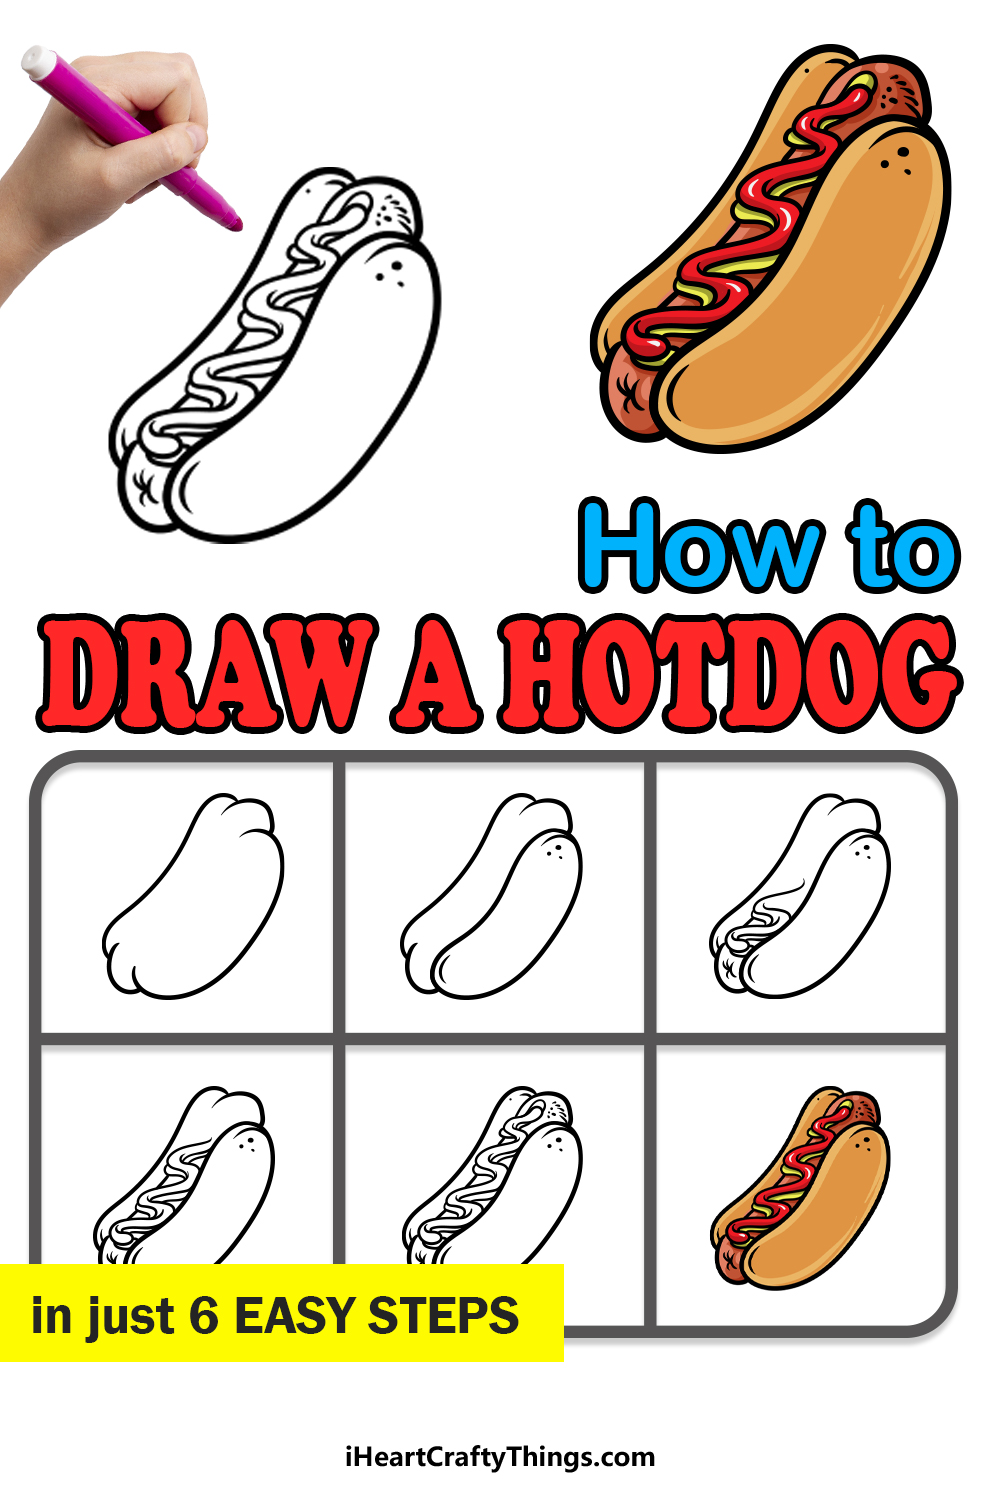 how to draw a hotdog in 6 easy steps